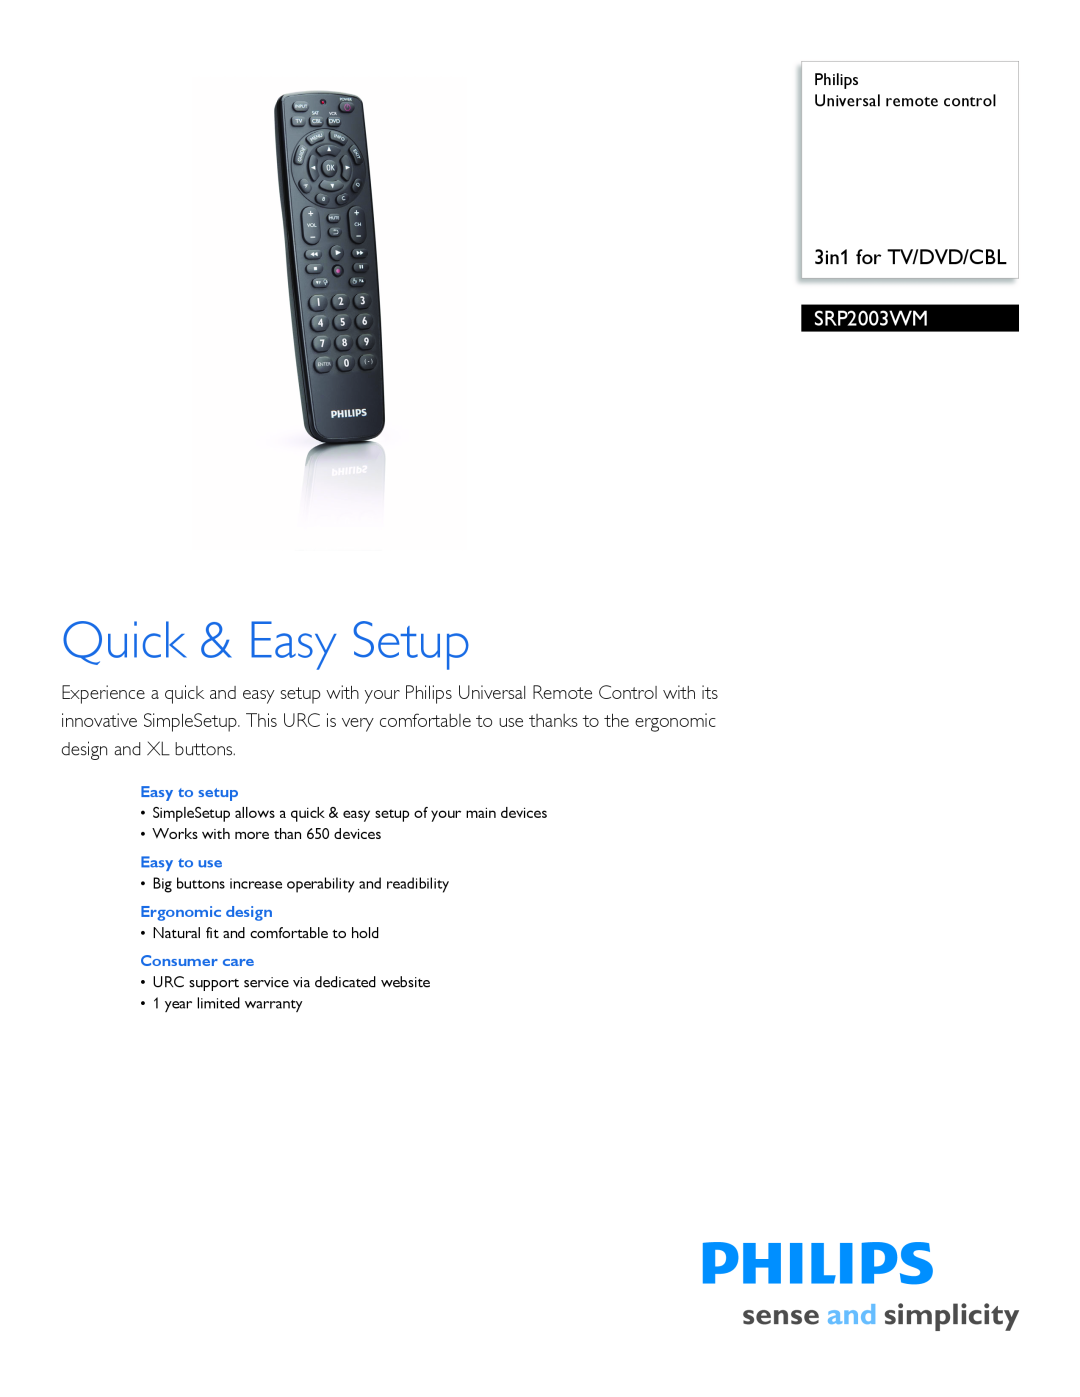 Philips SRP2003WM/17 warranty Quick & Easy Setup, 3in1 for TV/DVD/CBL, Philips Universal remote control 